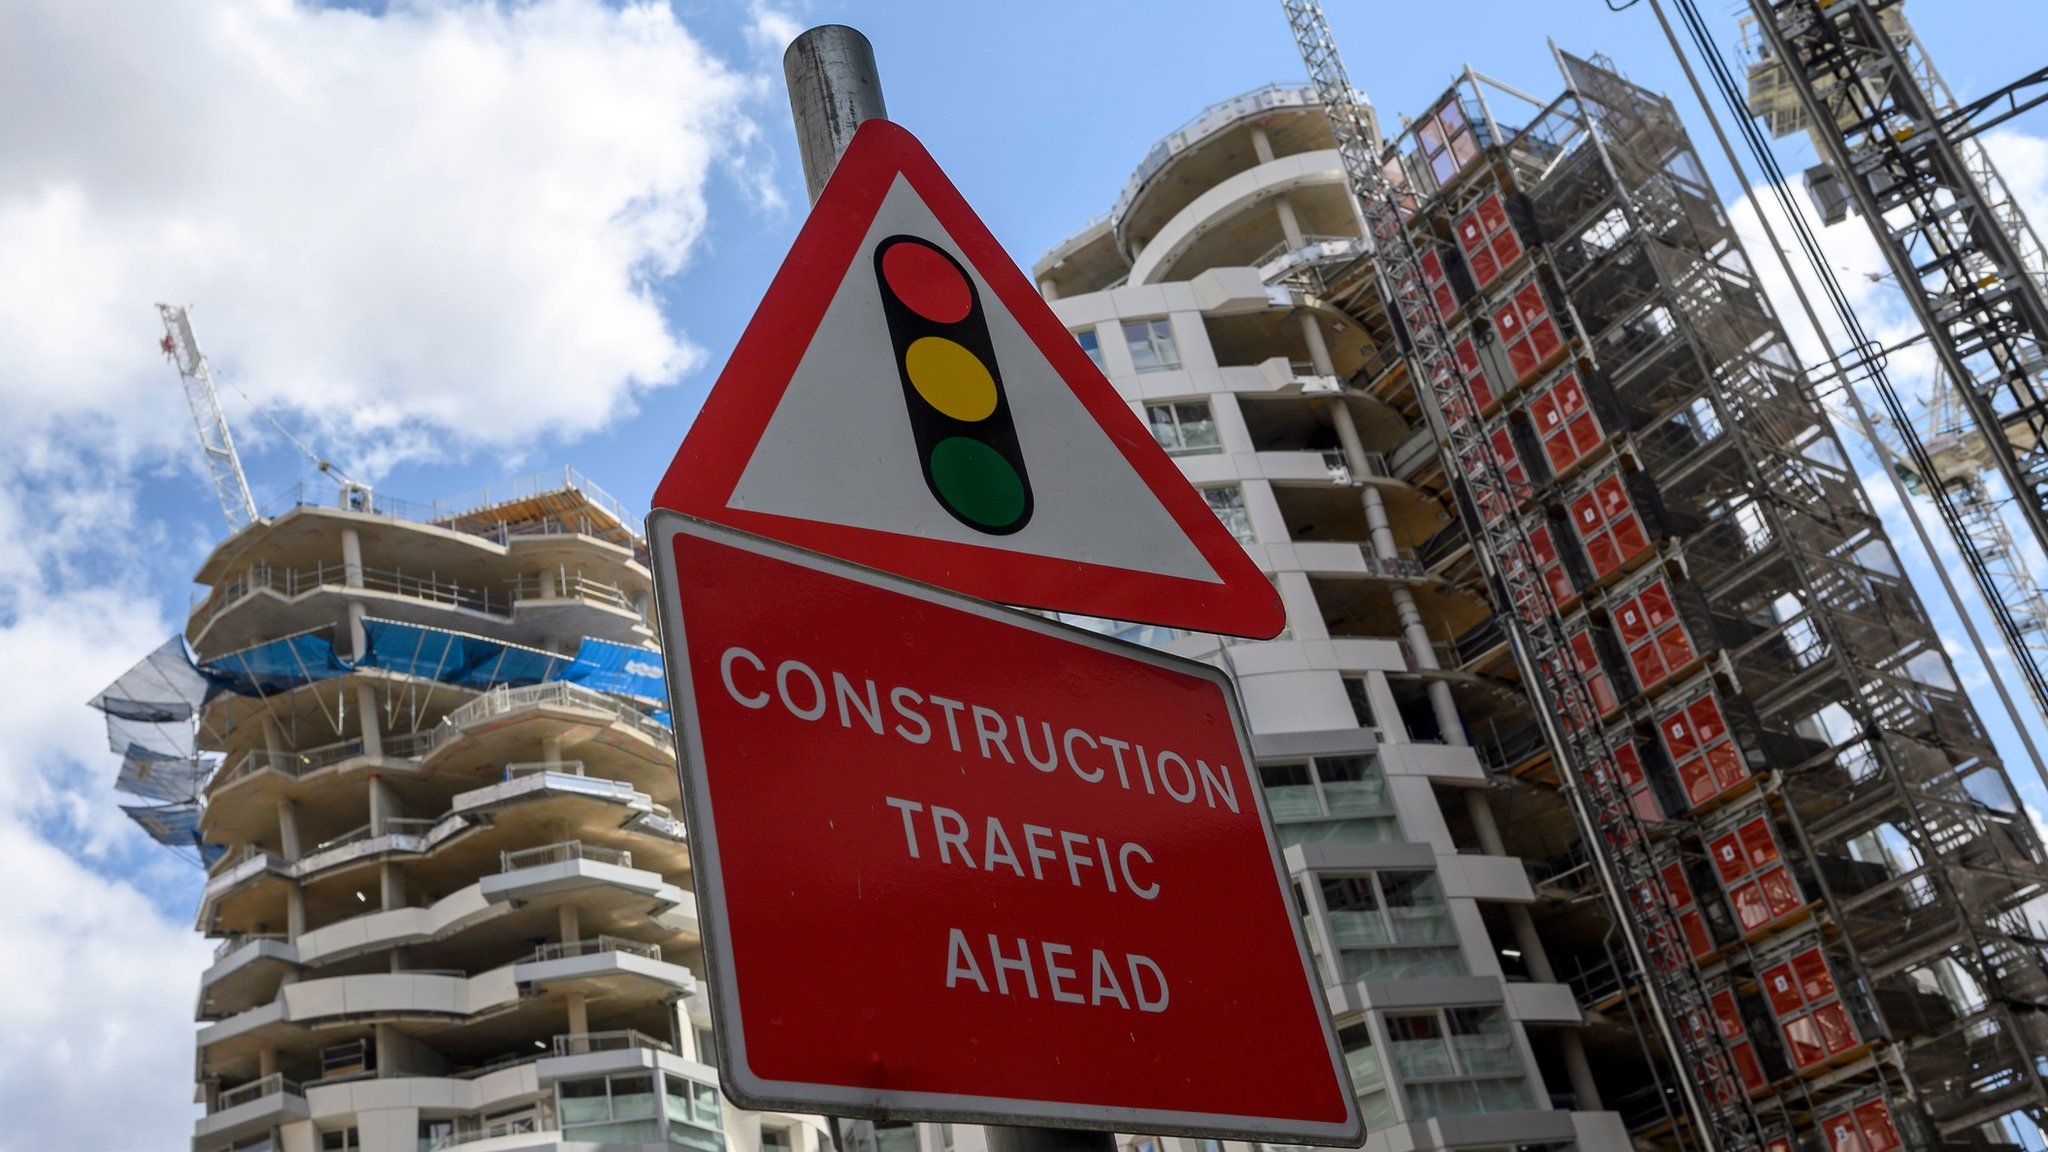 'Traffic ahead' sign in front of building site